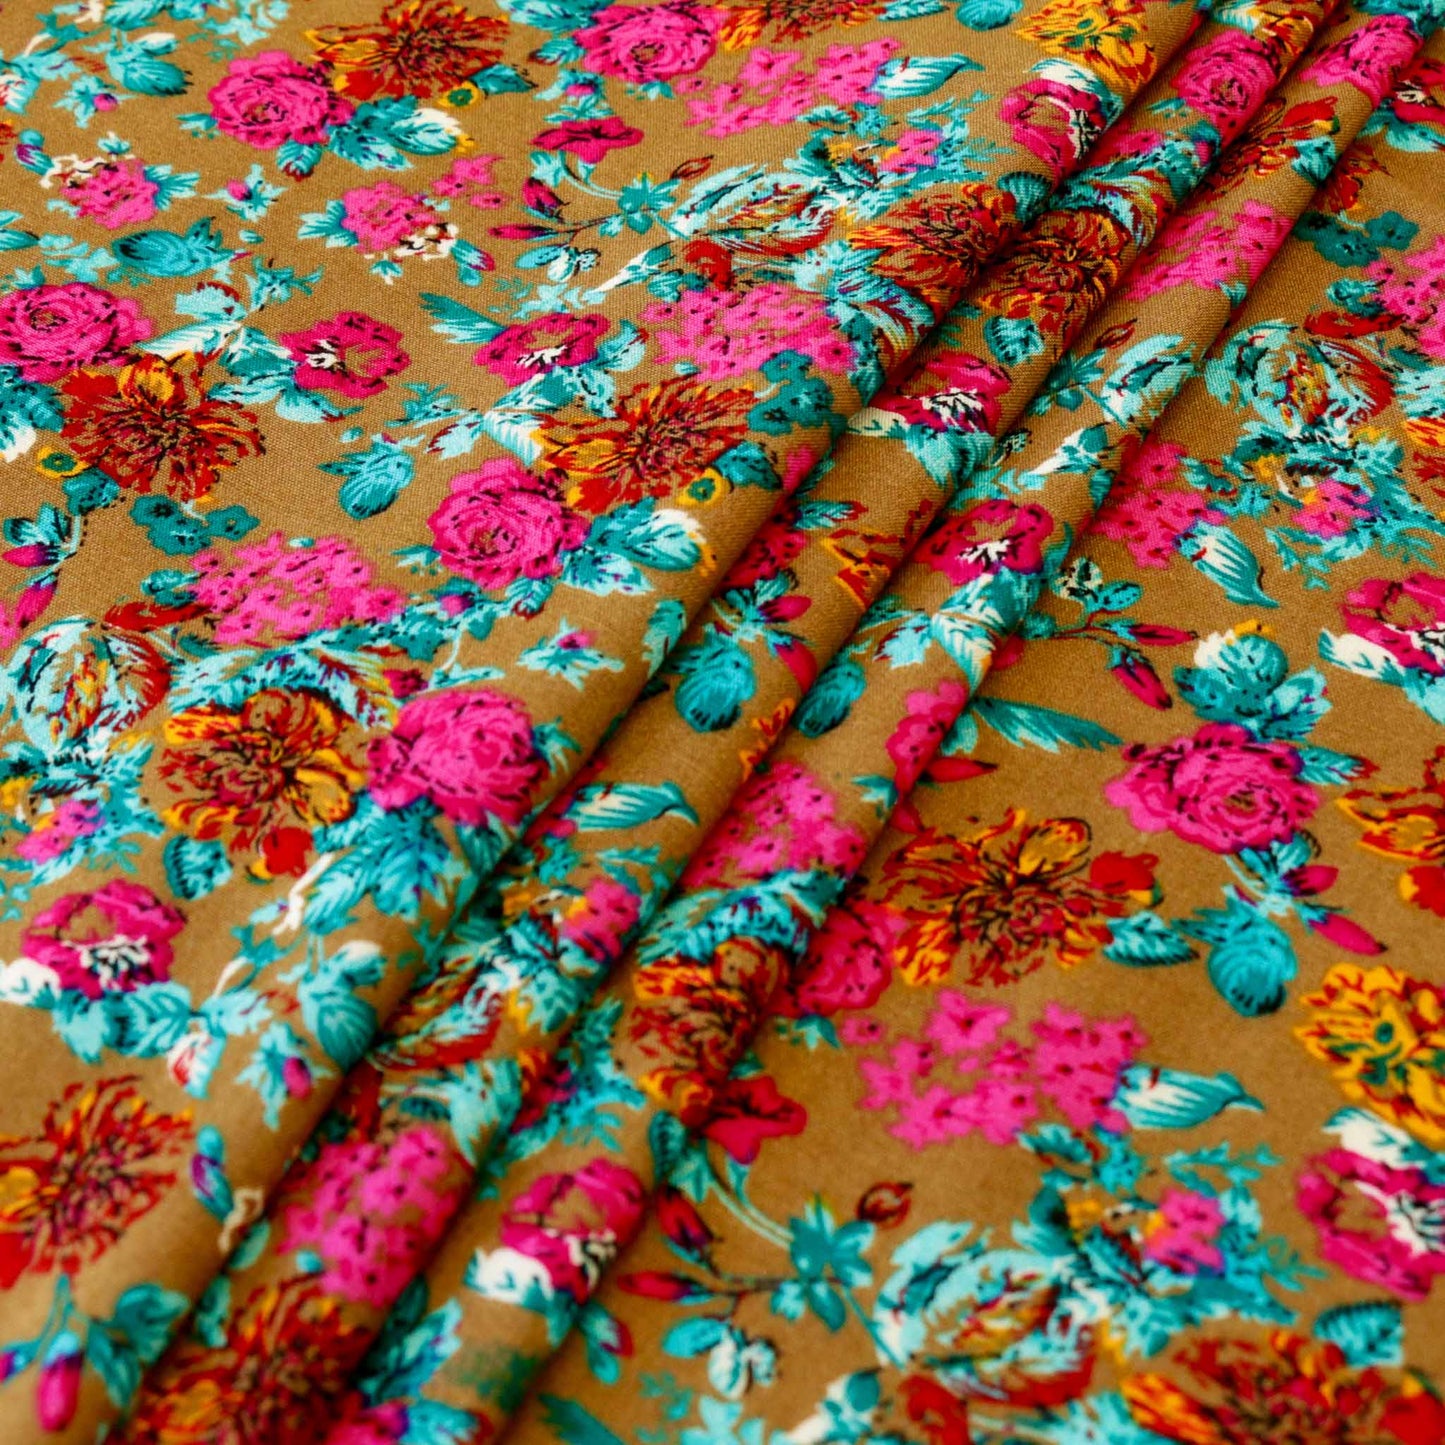 folded beige viscose rayon challis dressmaking fabric with pink and blue floral print